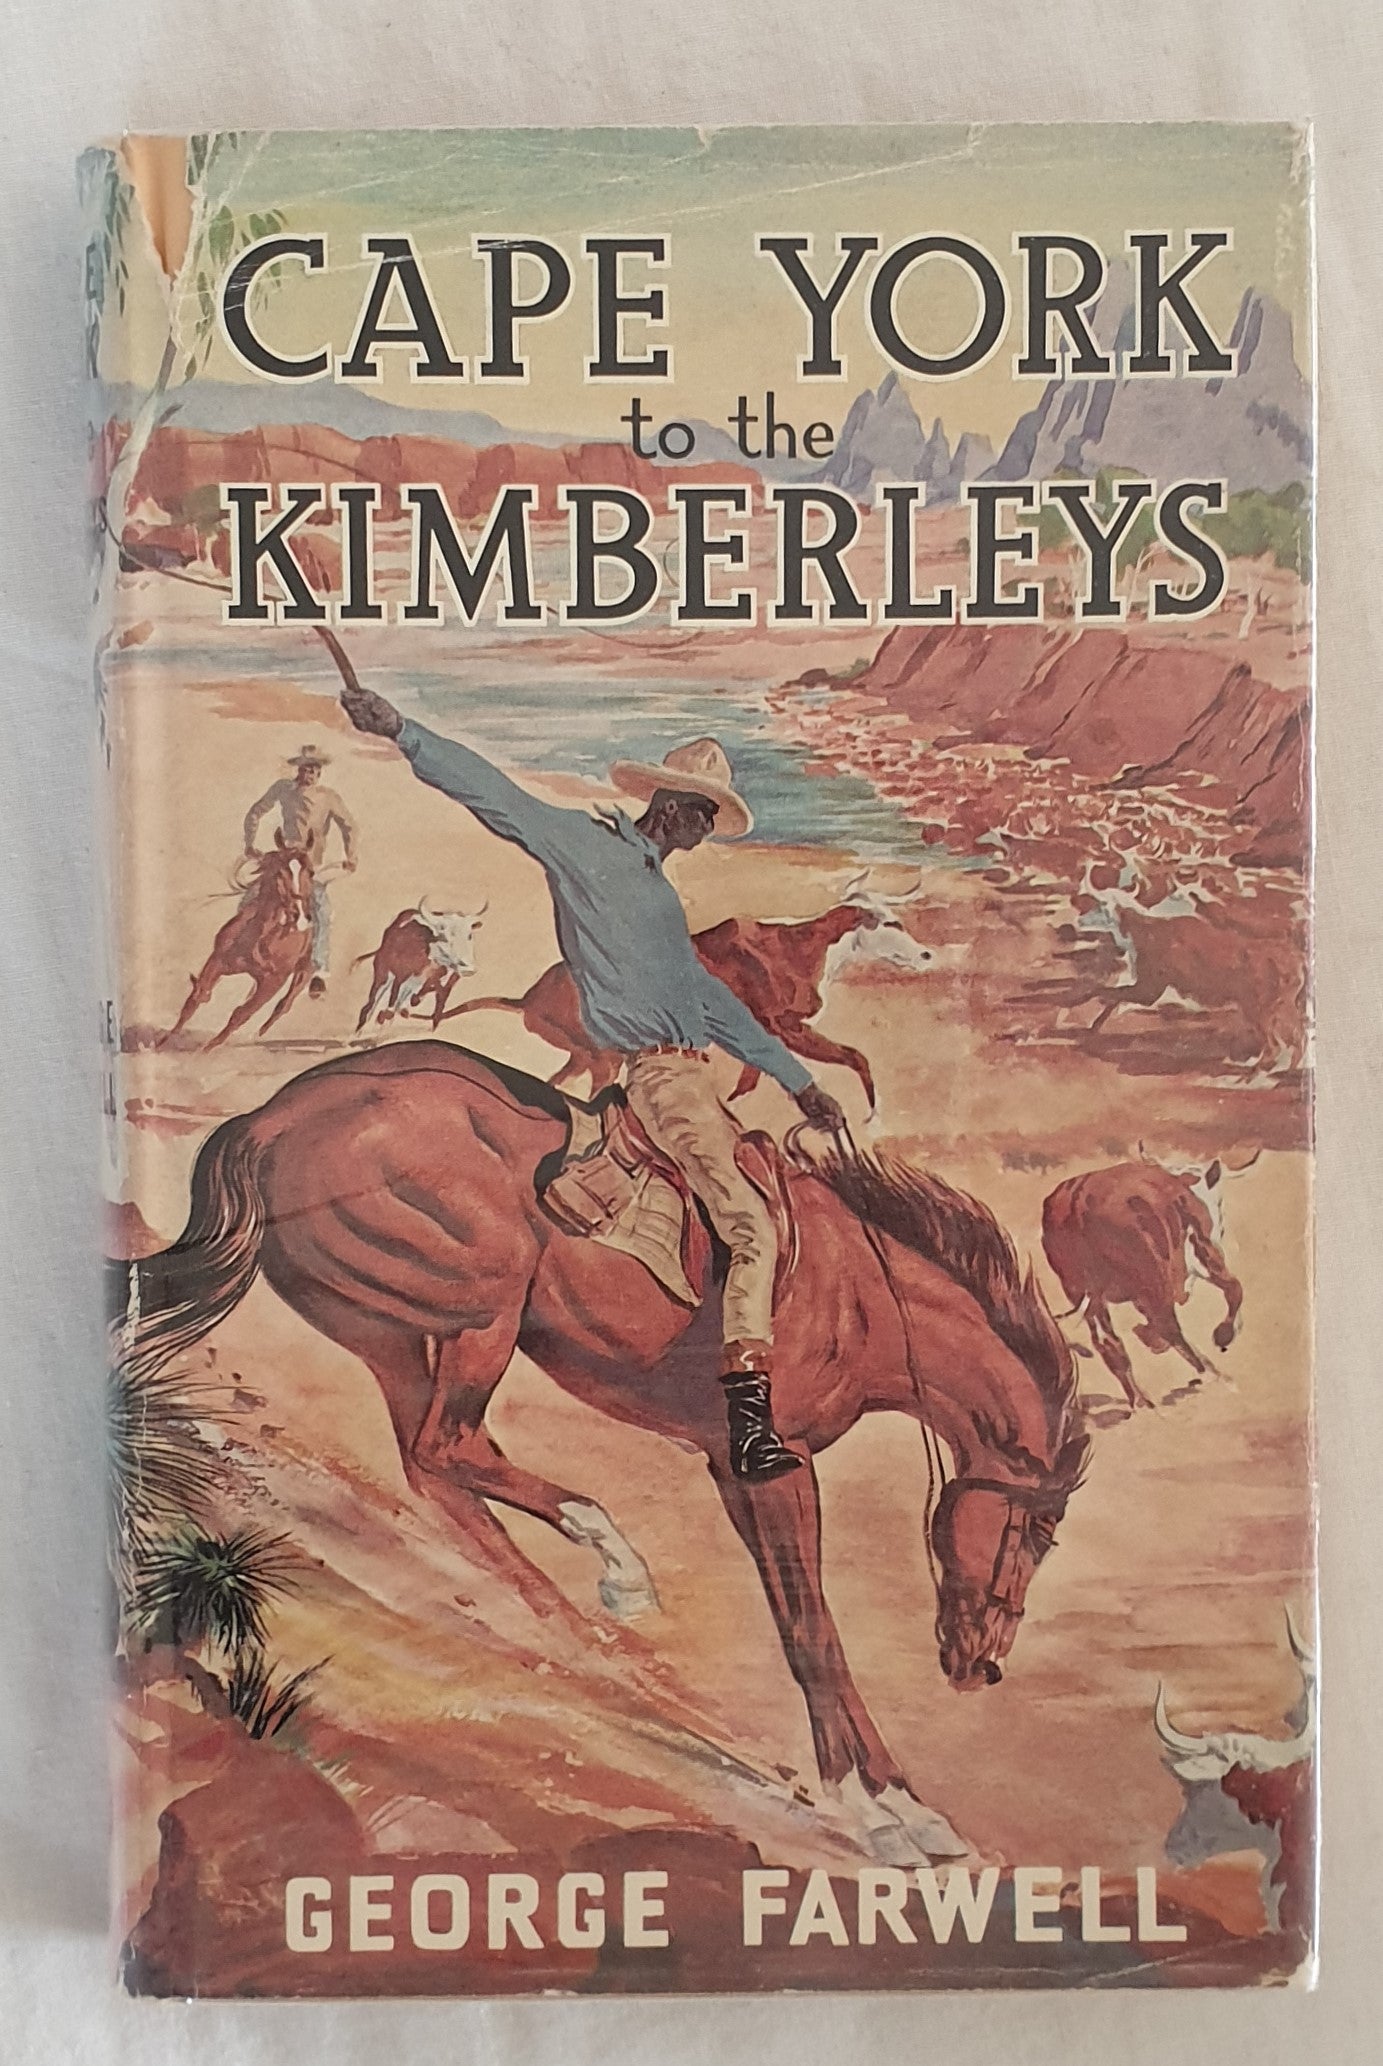 Cape York to the Kimberleys by George Farwell